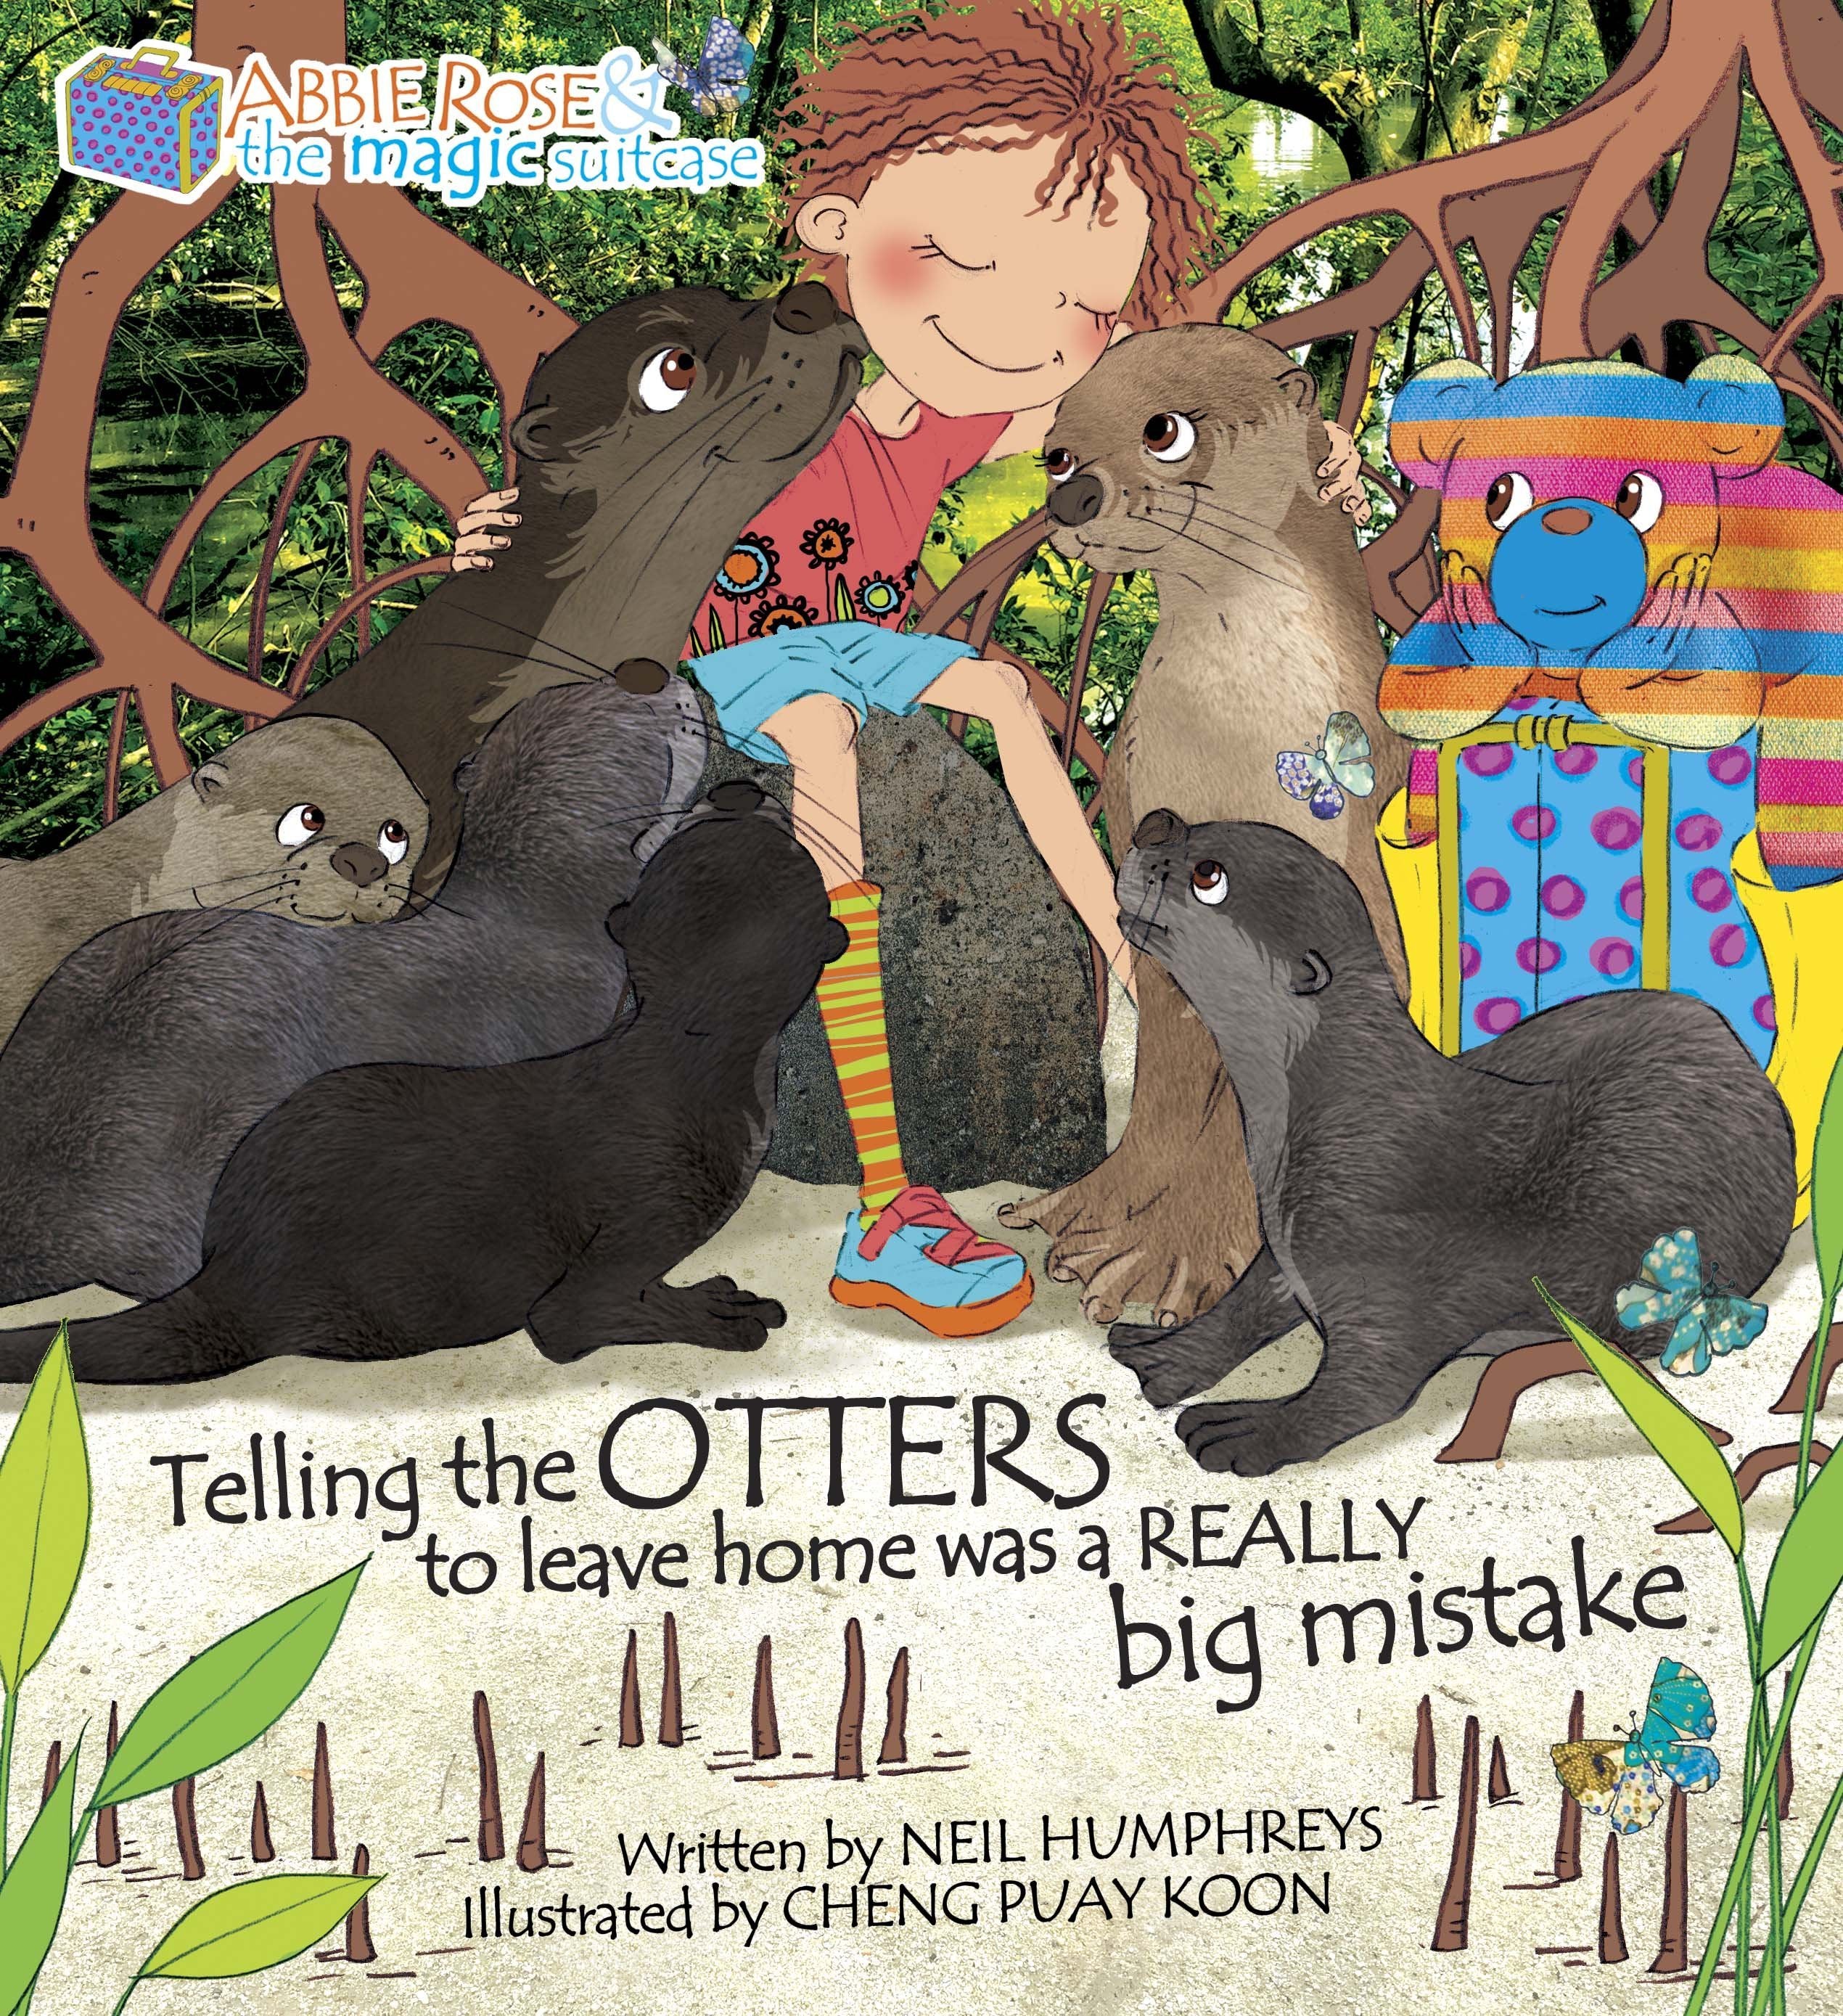 Abbie Rose and the Magic Suitcase: Telling The Otters To Leave Was A Big Mistake